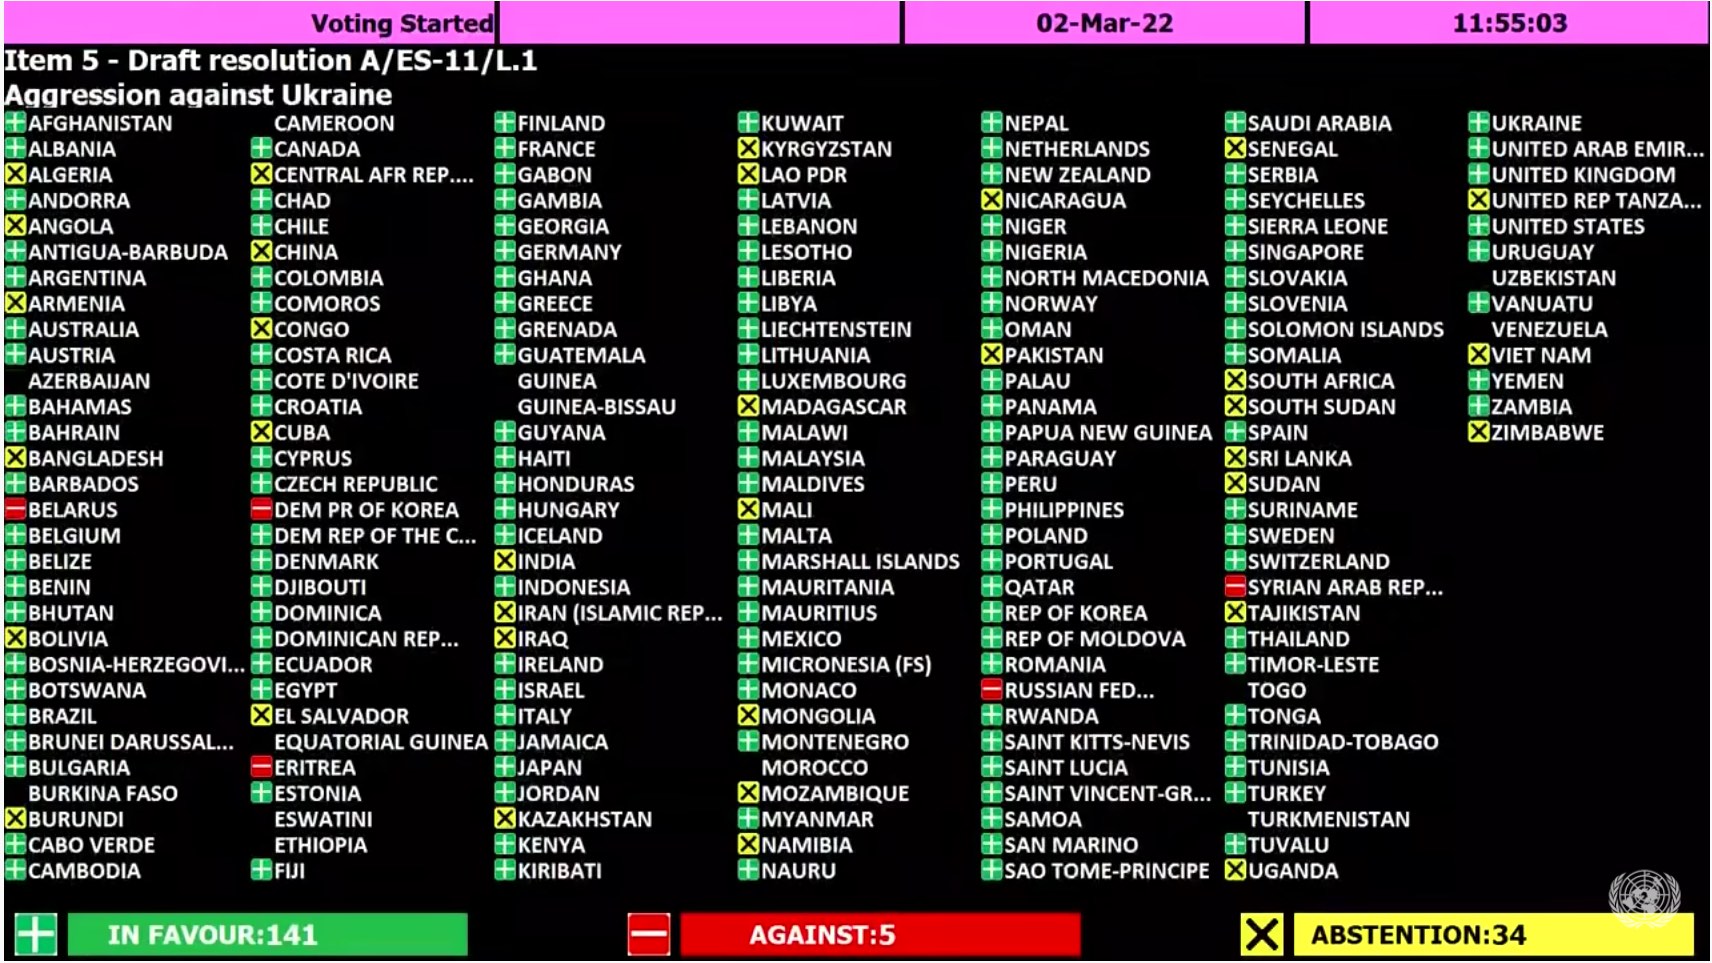 UN General Assembly vote on special session on "Aggression against Ukraine", 2 March 2022, Source: UN.